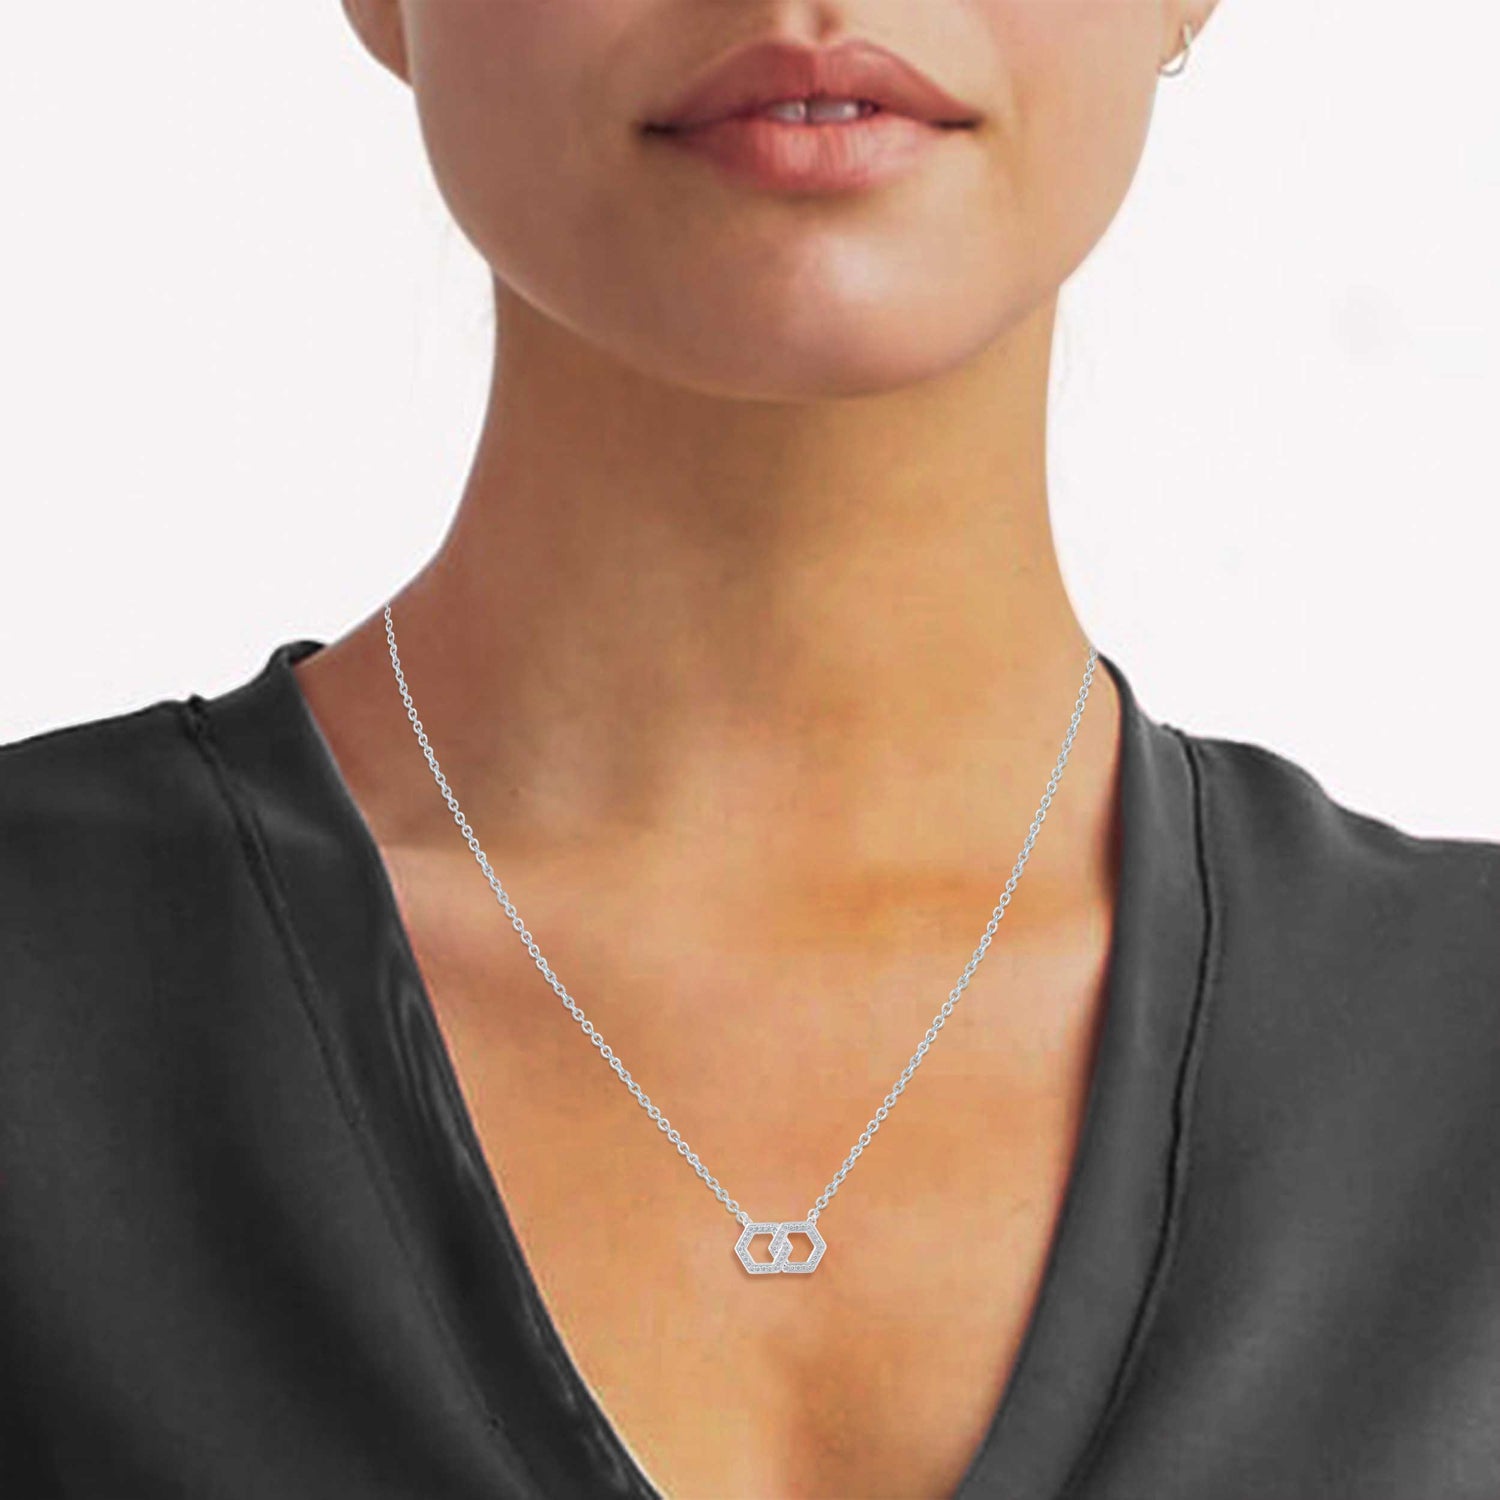 1/4 Cttw Diamond Double Link Infinity Hexagon Pendant Necklace set in 925 Sterling Silver 14K Yellow Gold Plating